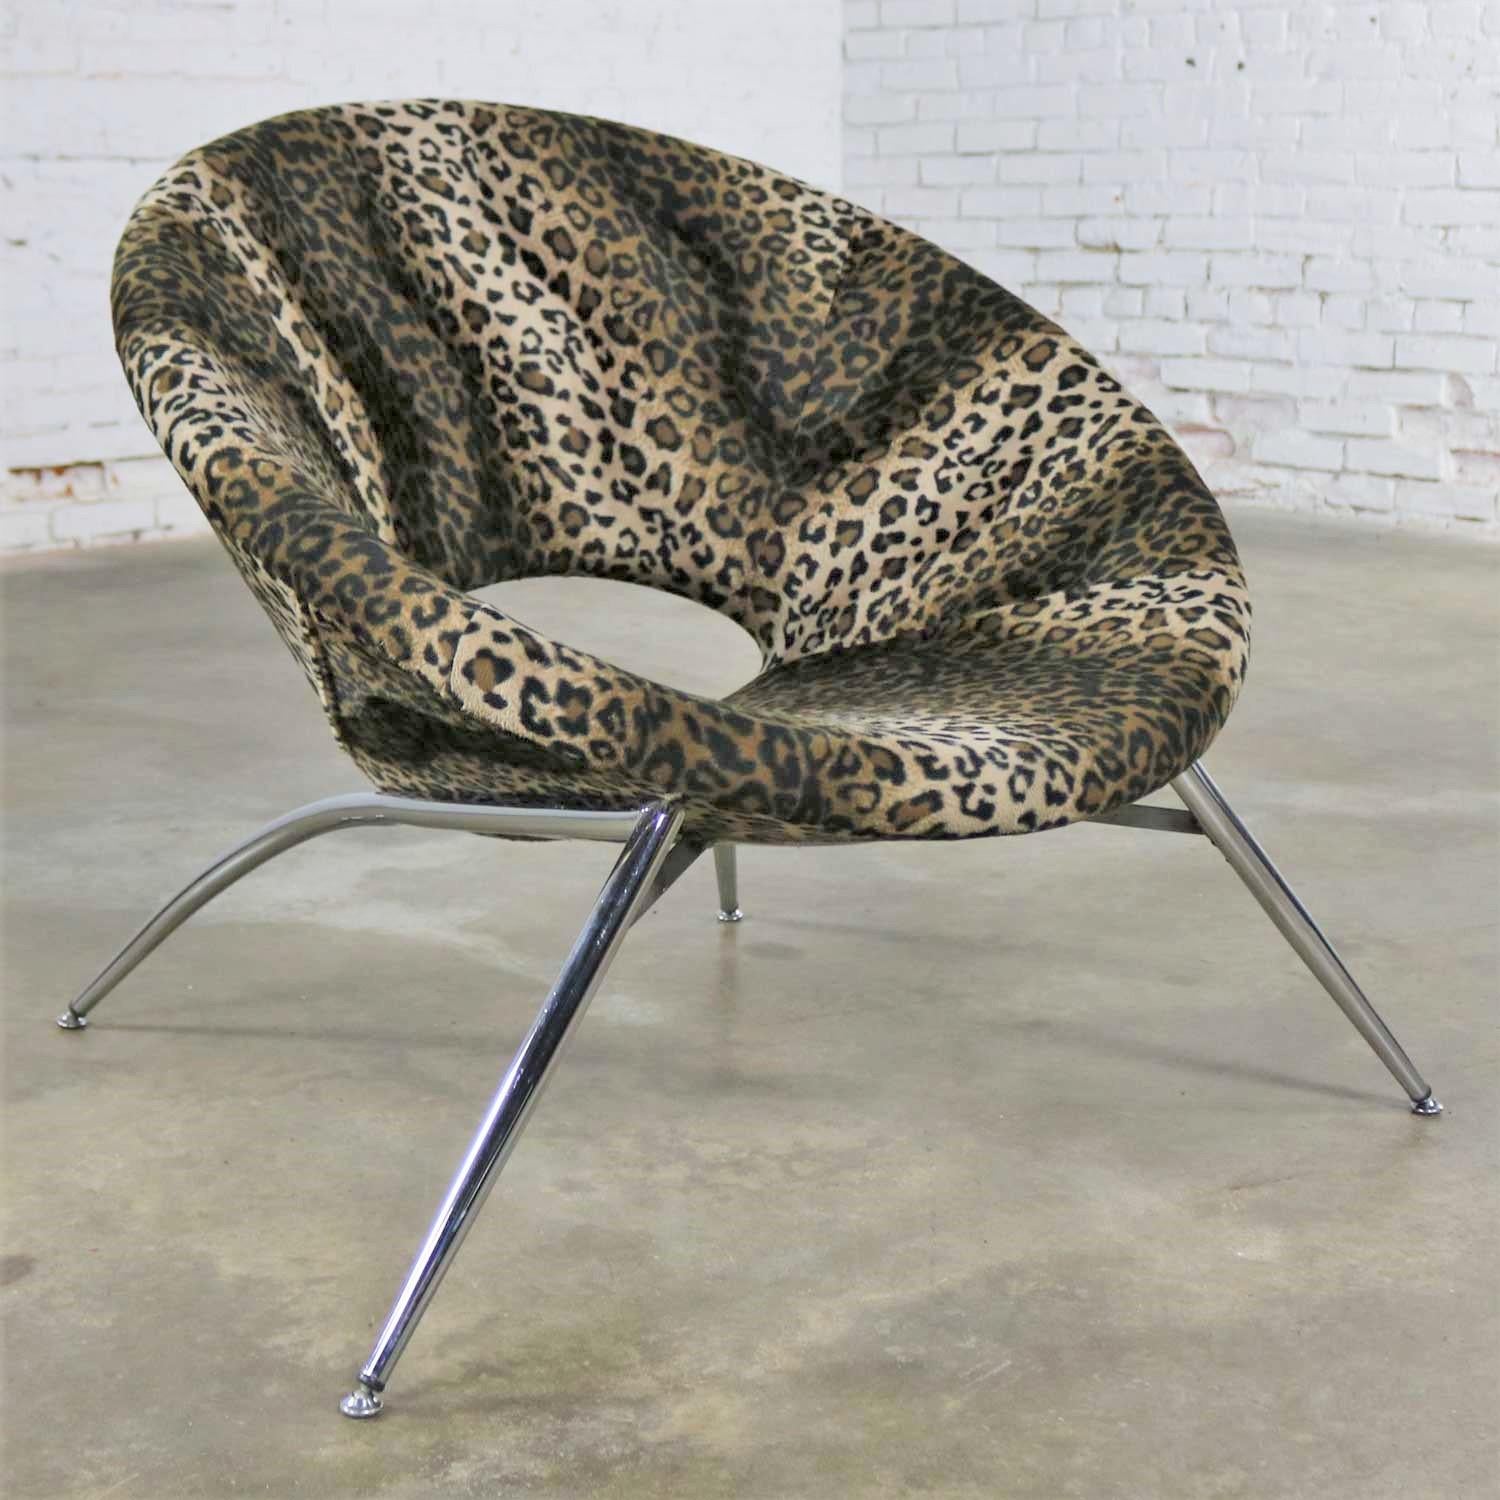 Fabulous round hoop, bucket, or tub chair upholstered in animal print fabric with chrome legs and made in Italy. It is in wonderful condition and ready to use, circa late 20th century.

Whoa! Now that’s Italian! This is one excitingly beautiful